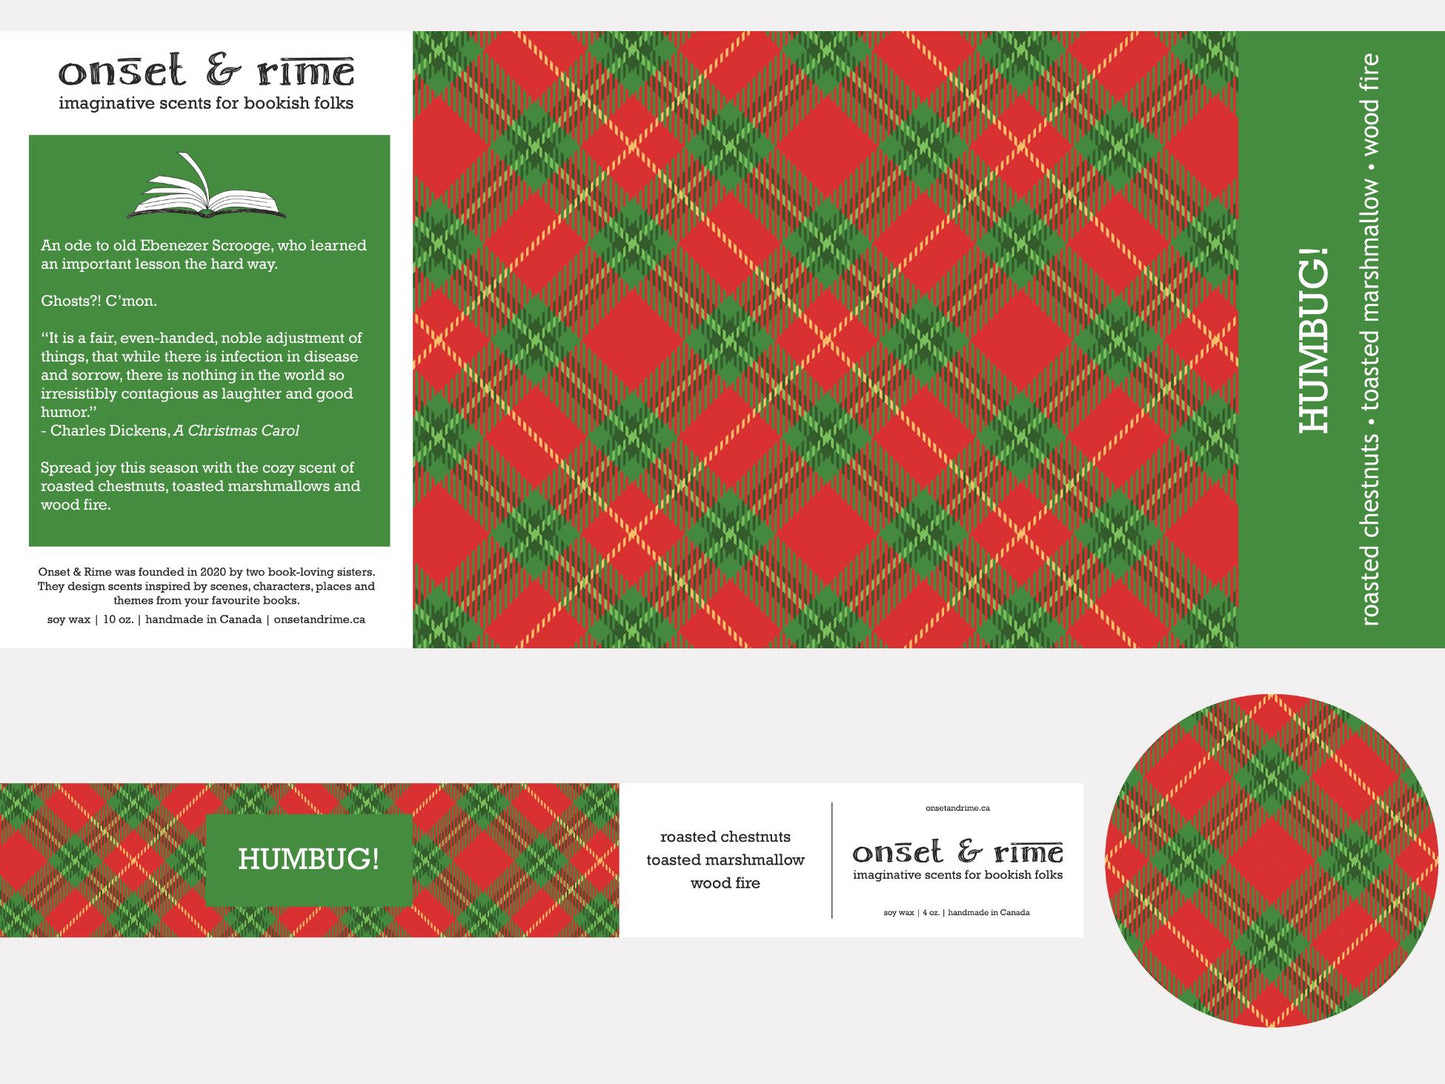 A close up view of the label for the Onset & Rime sweet, smoky scented candle called "Humbug!". The label is a red and green plaid pattern. The text on the label is "Humbug! - Roasted Chestnuts, Toasted Marshmallow, Wood Fire".